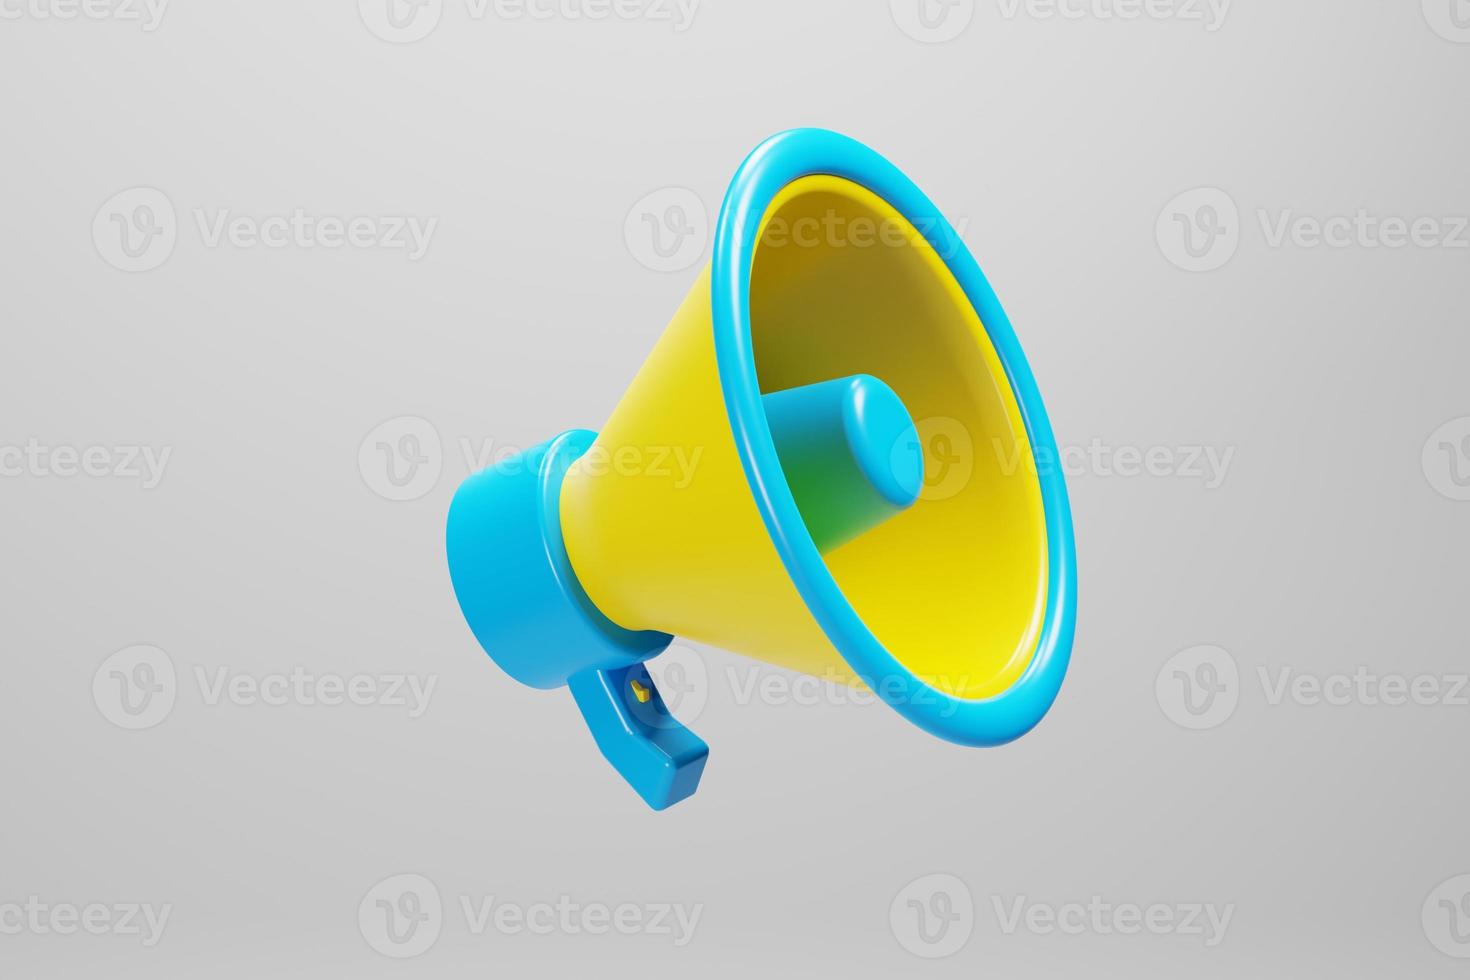 3d rendering megaphone with yellow and blue color isolated on white background photo